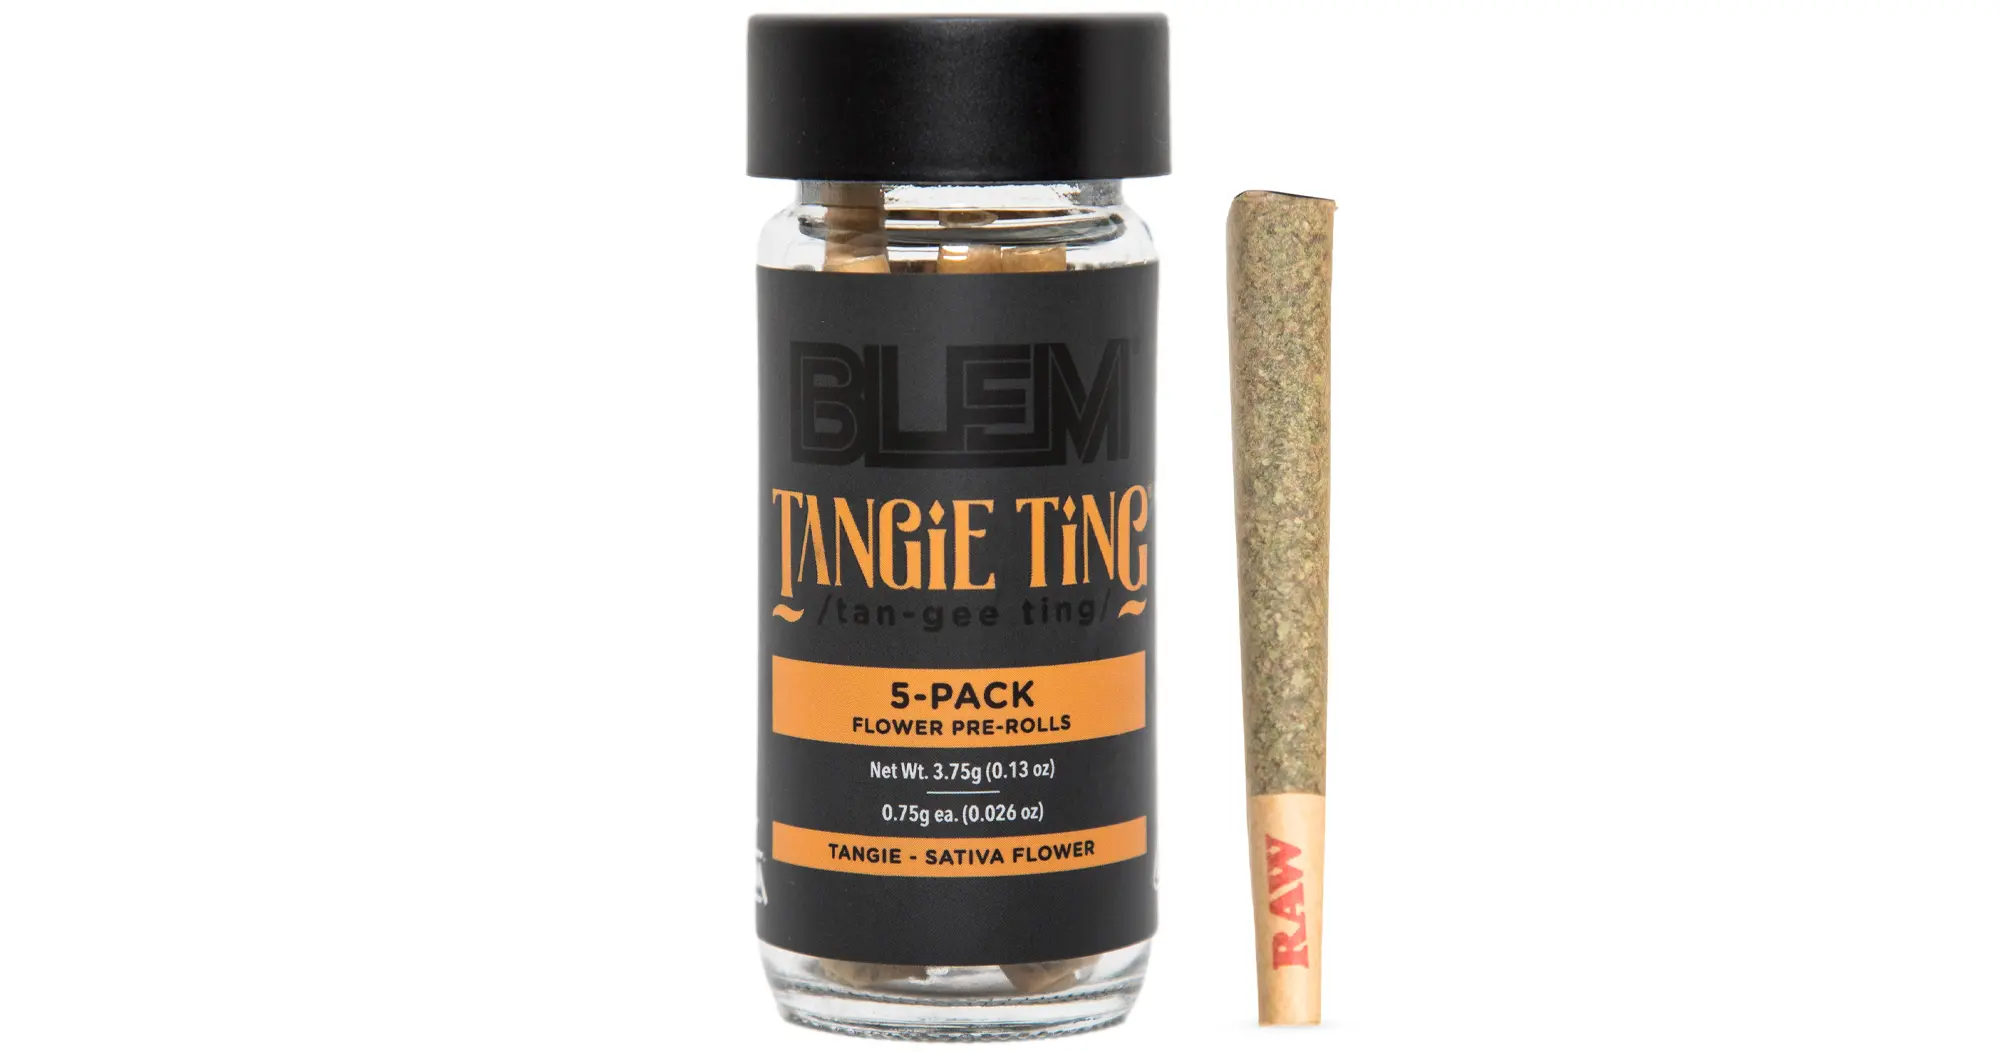 Tangie Ting Pre-Rolls